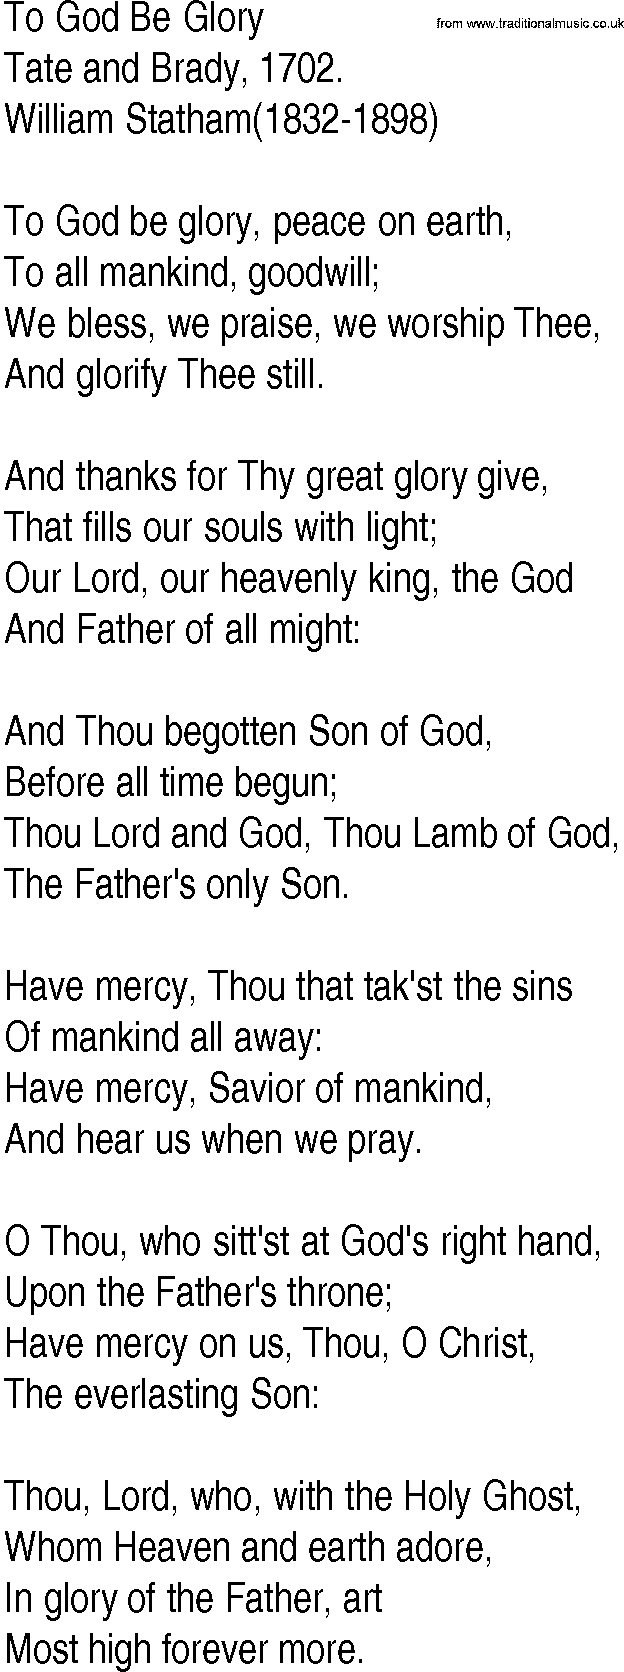 Hymn and Gospel Song: To God Be Glory by Tate and Brady lyrics